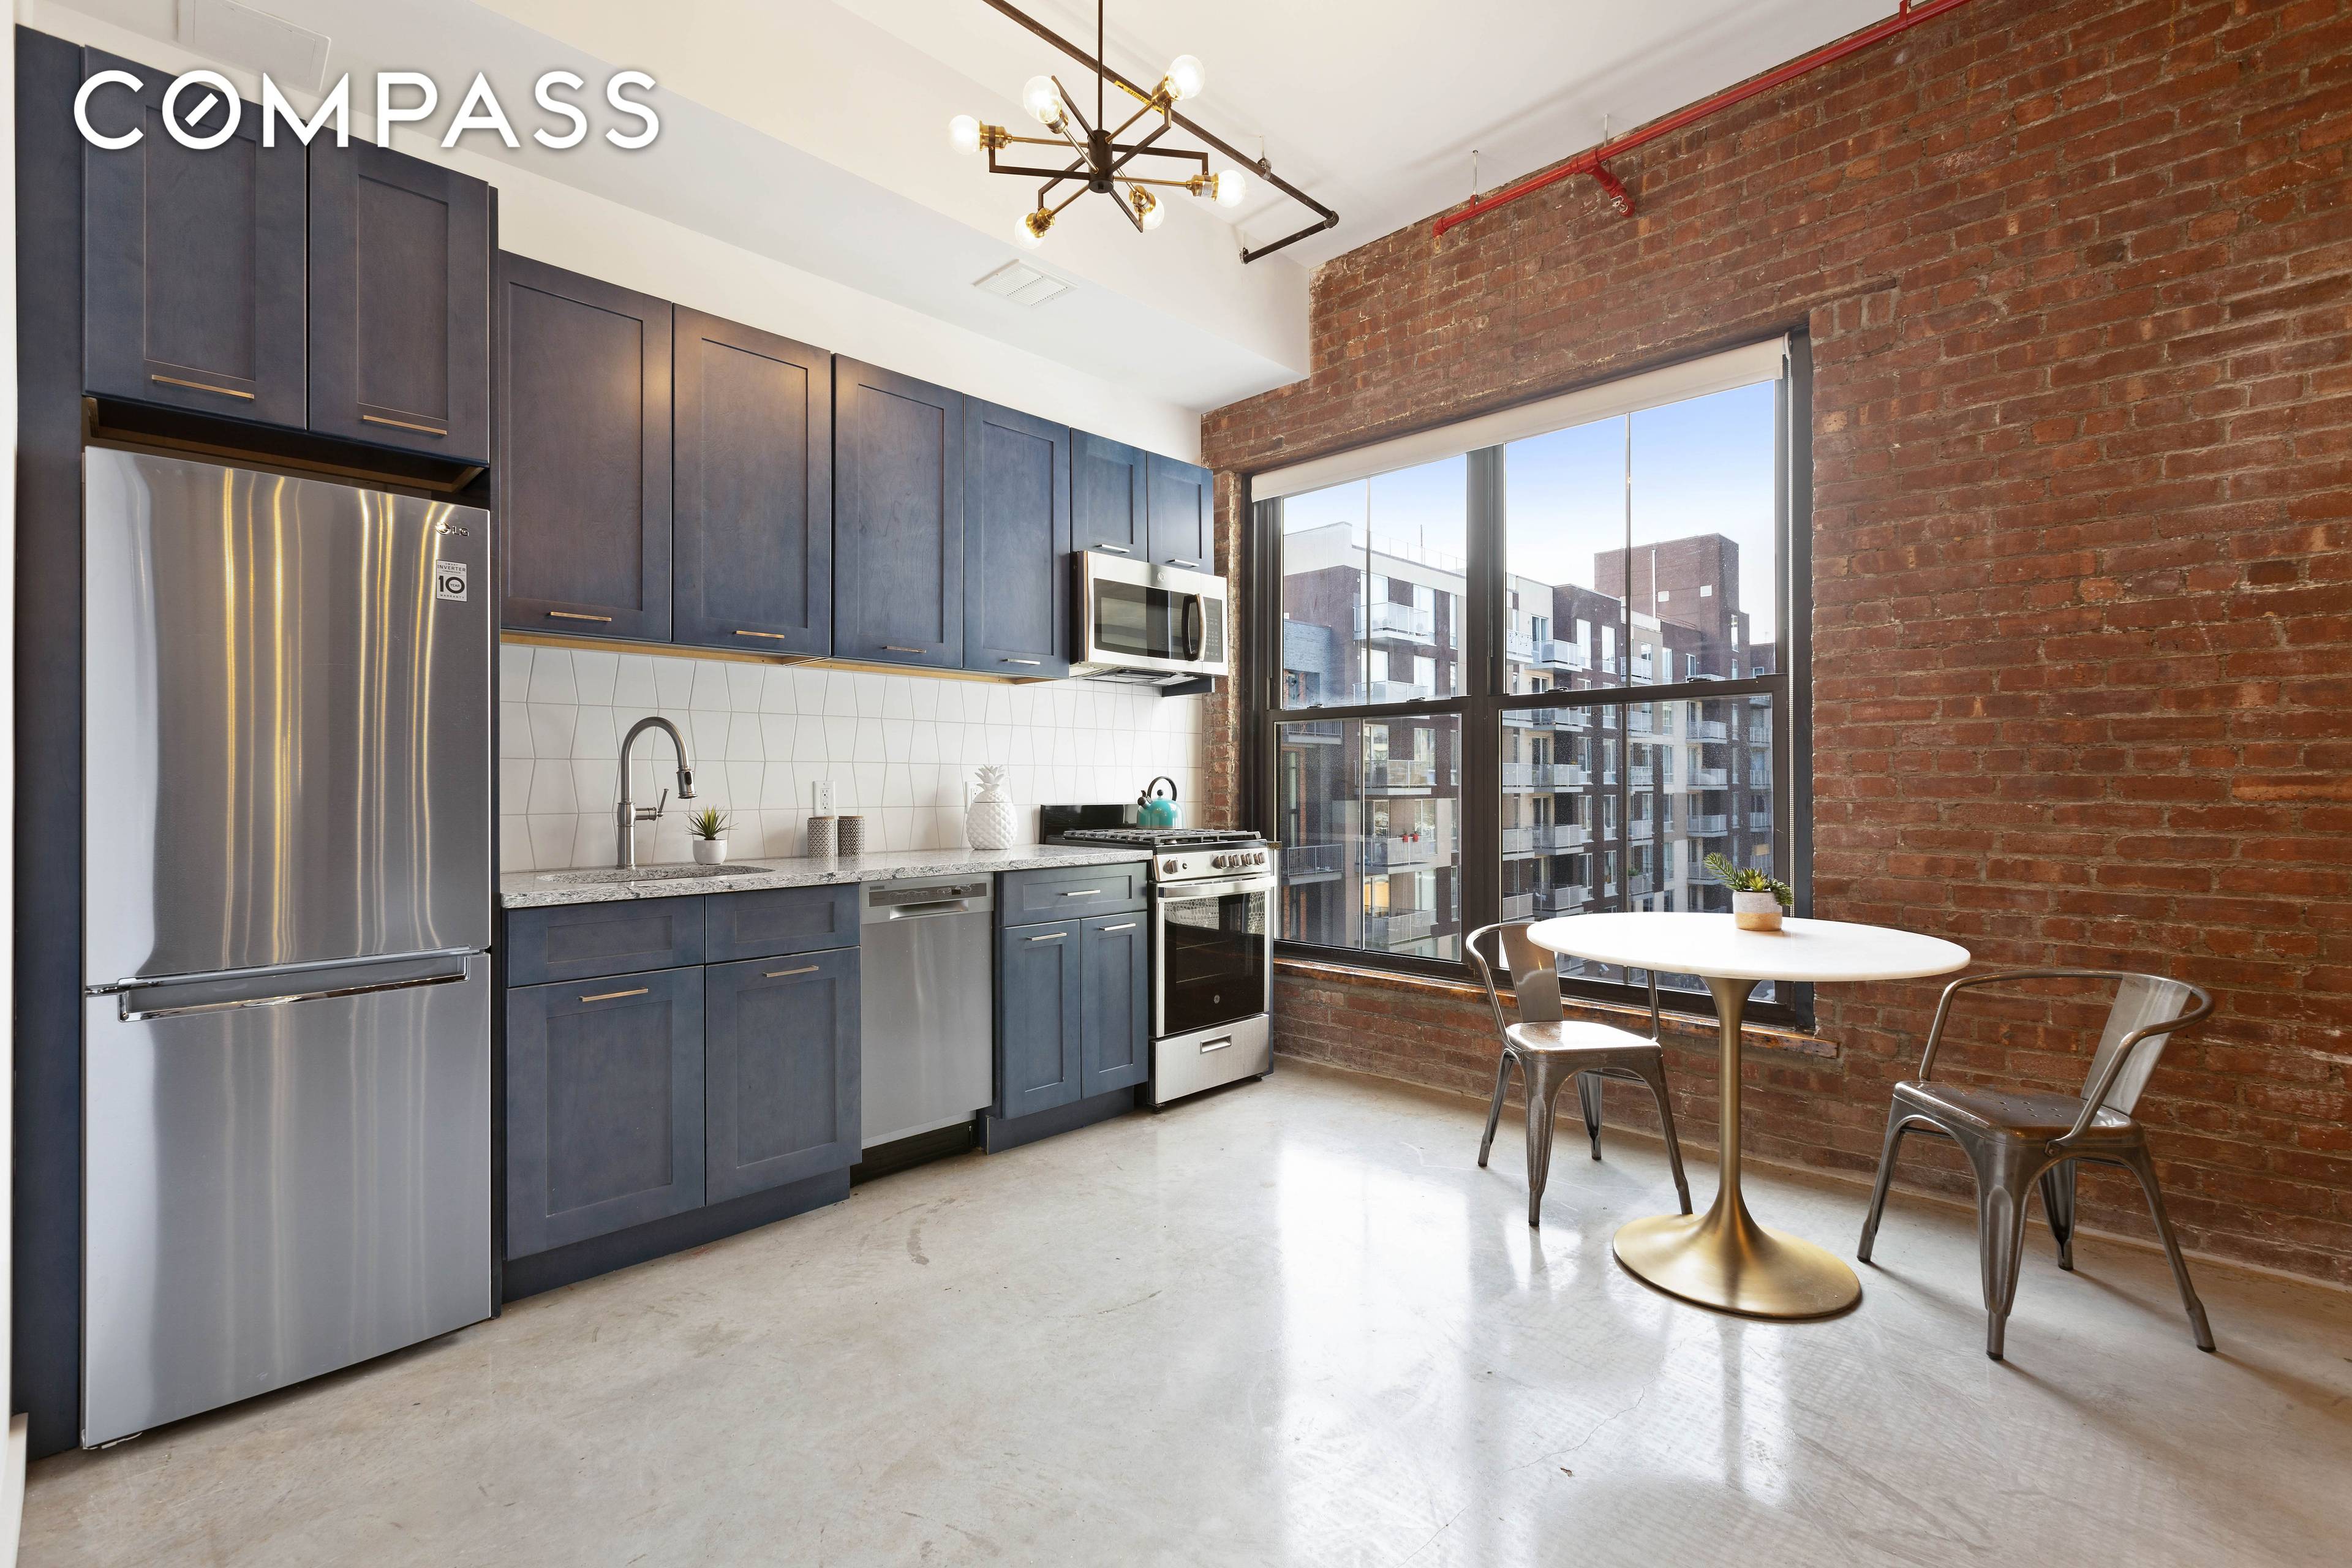 Authentic Loft with exposed brick, high ceilings, concrete floors, and walls of windows.